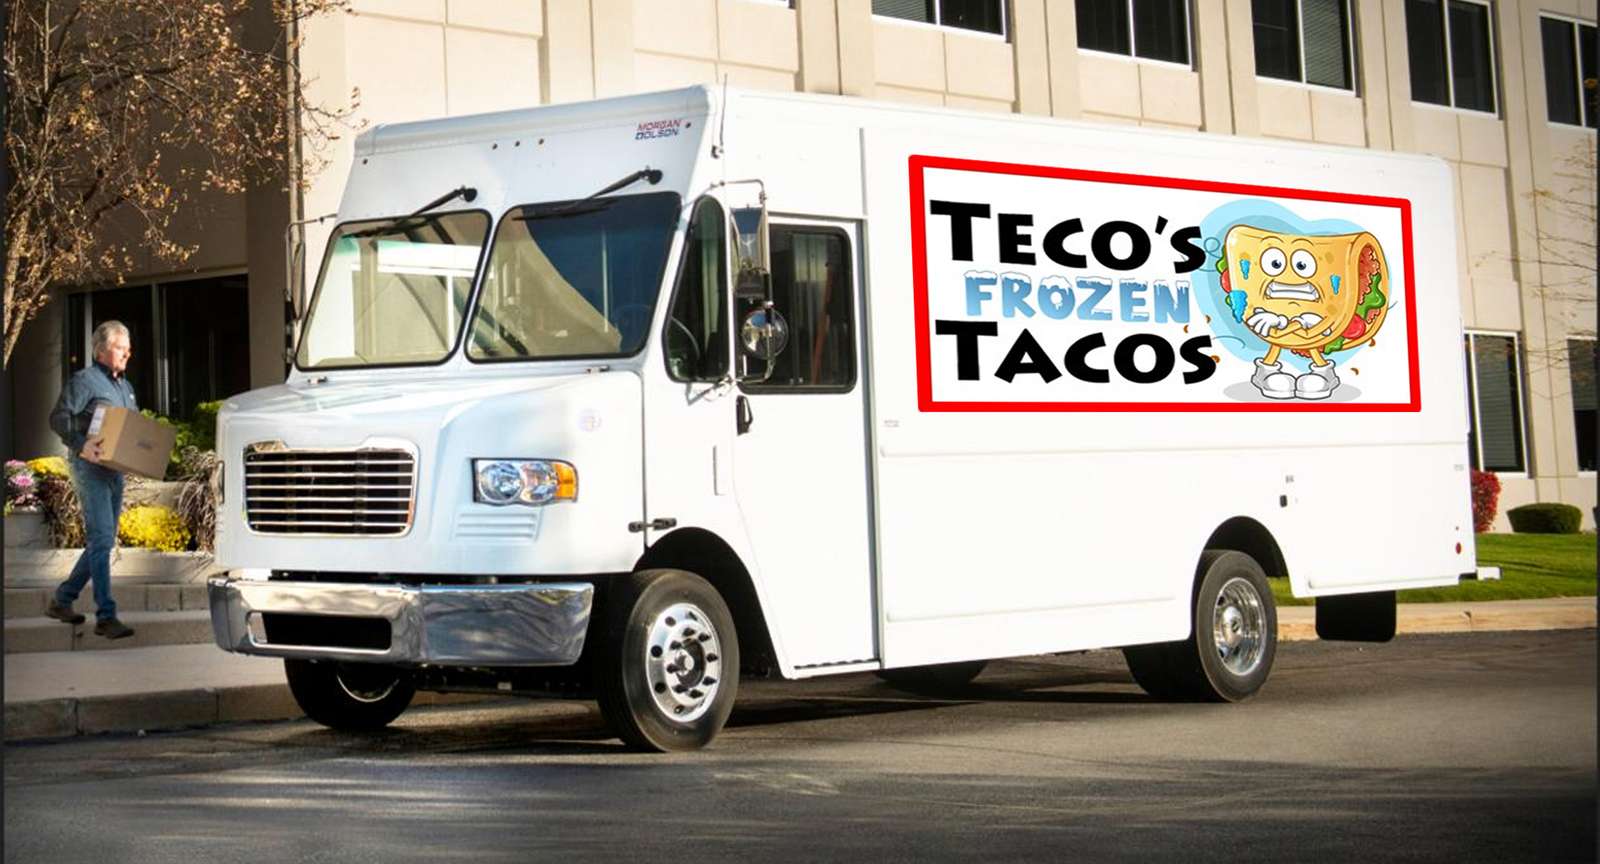 Teco's Taco Truck puzzle online from photo